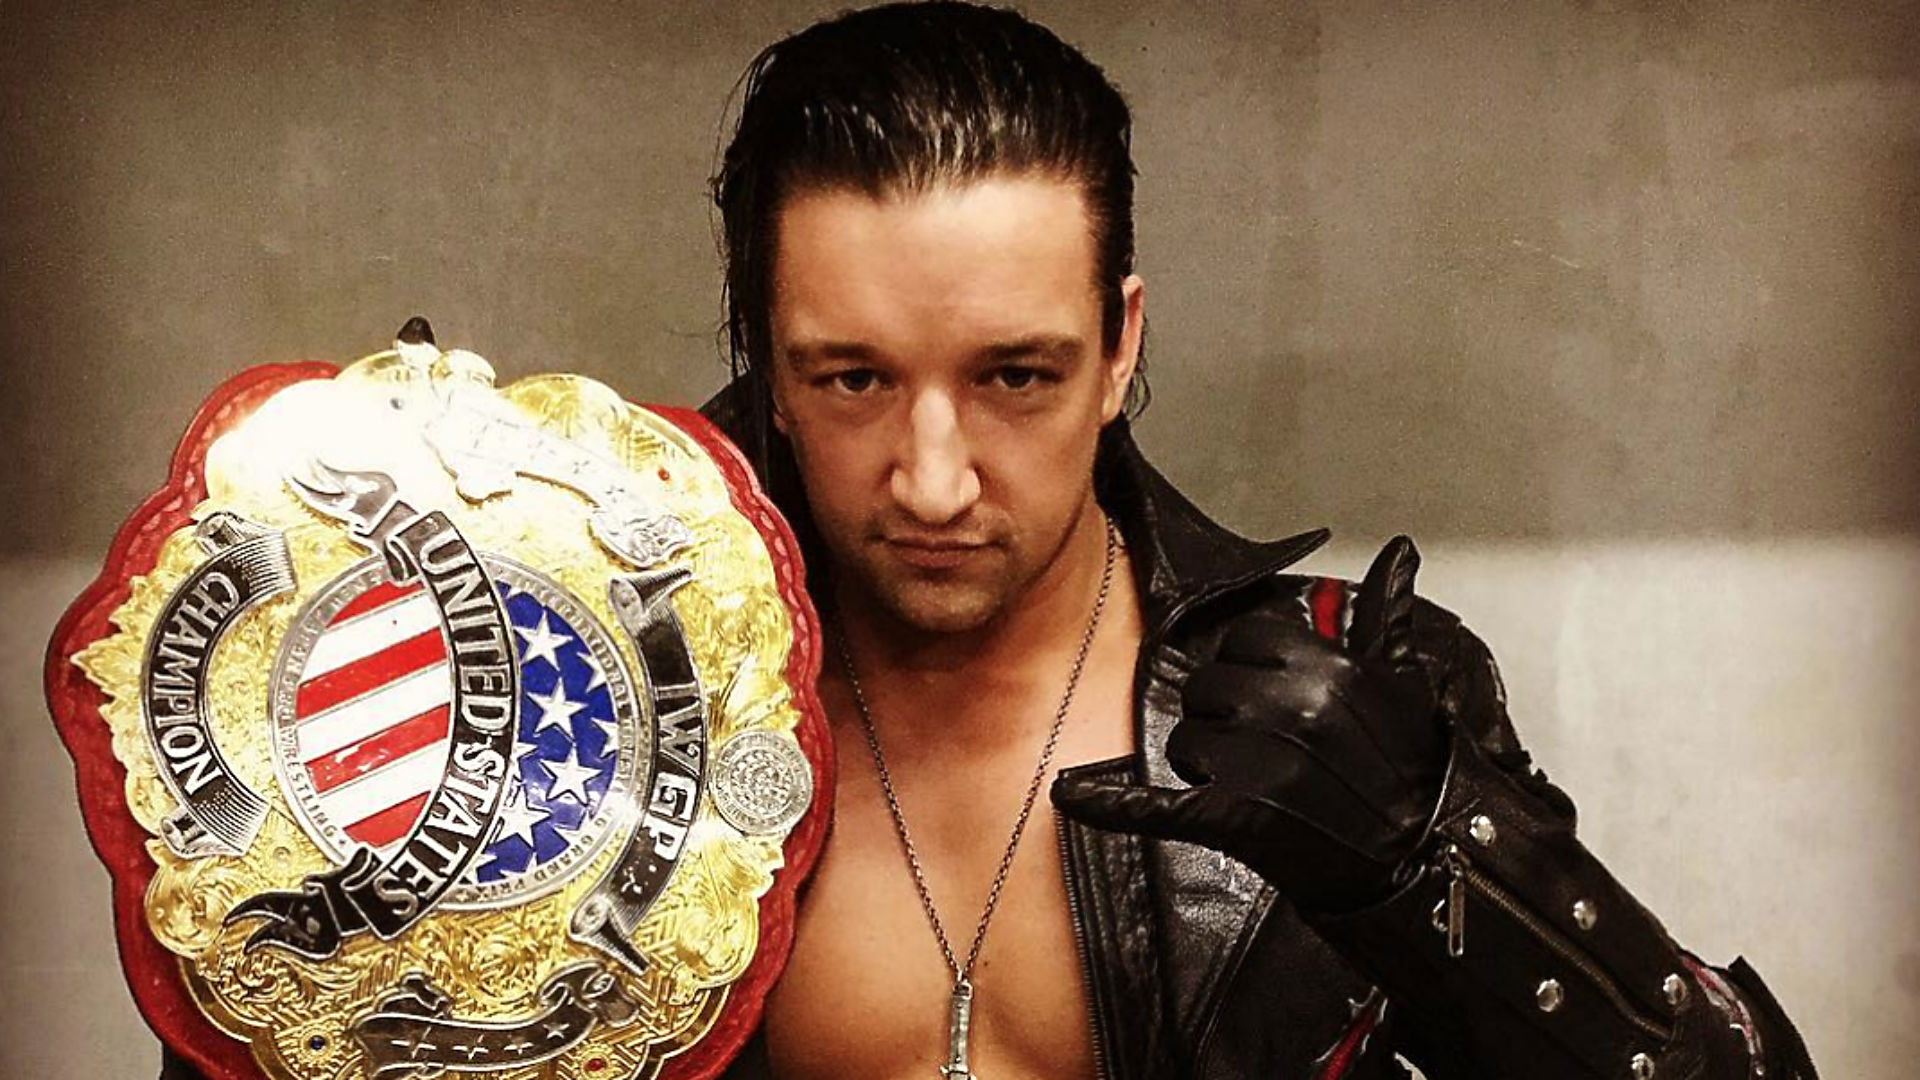 Jay White's New Look: Blue Hair and All - wide 1